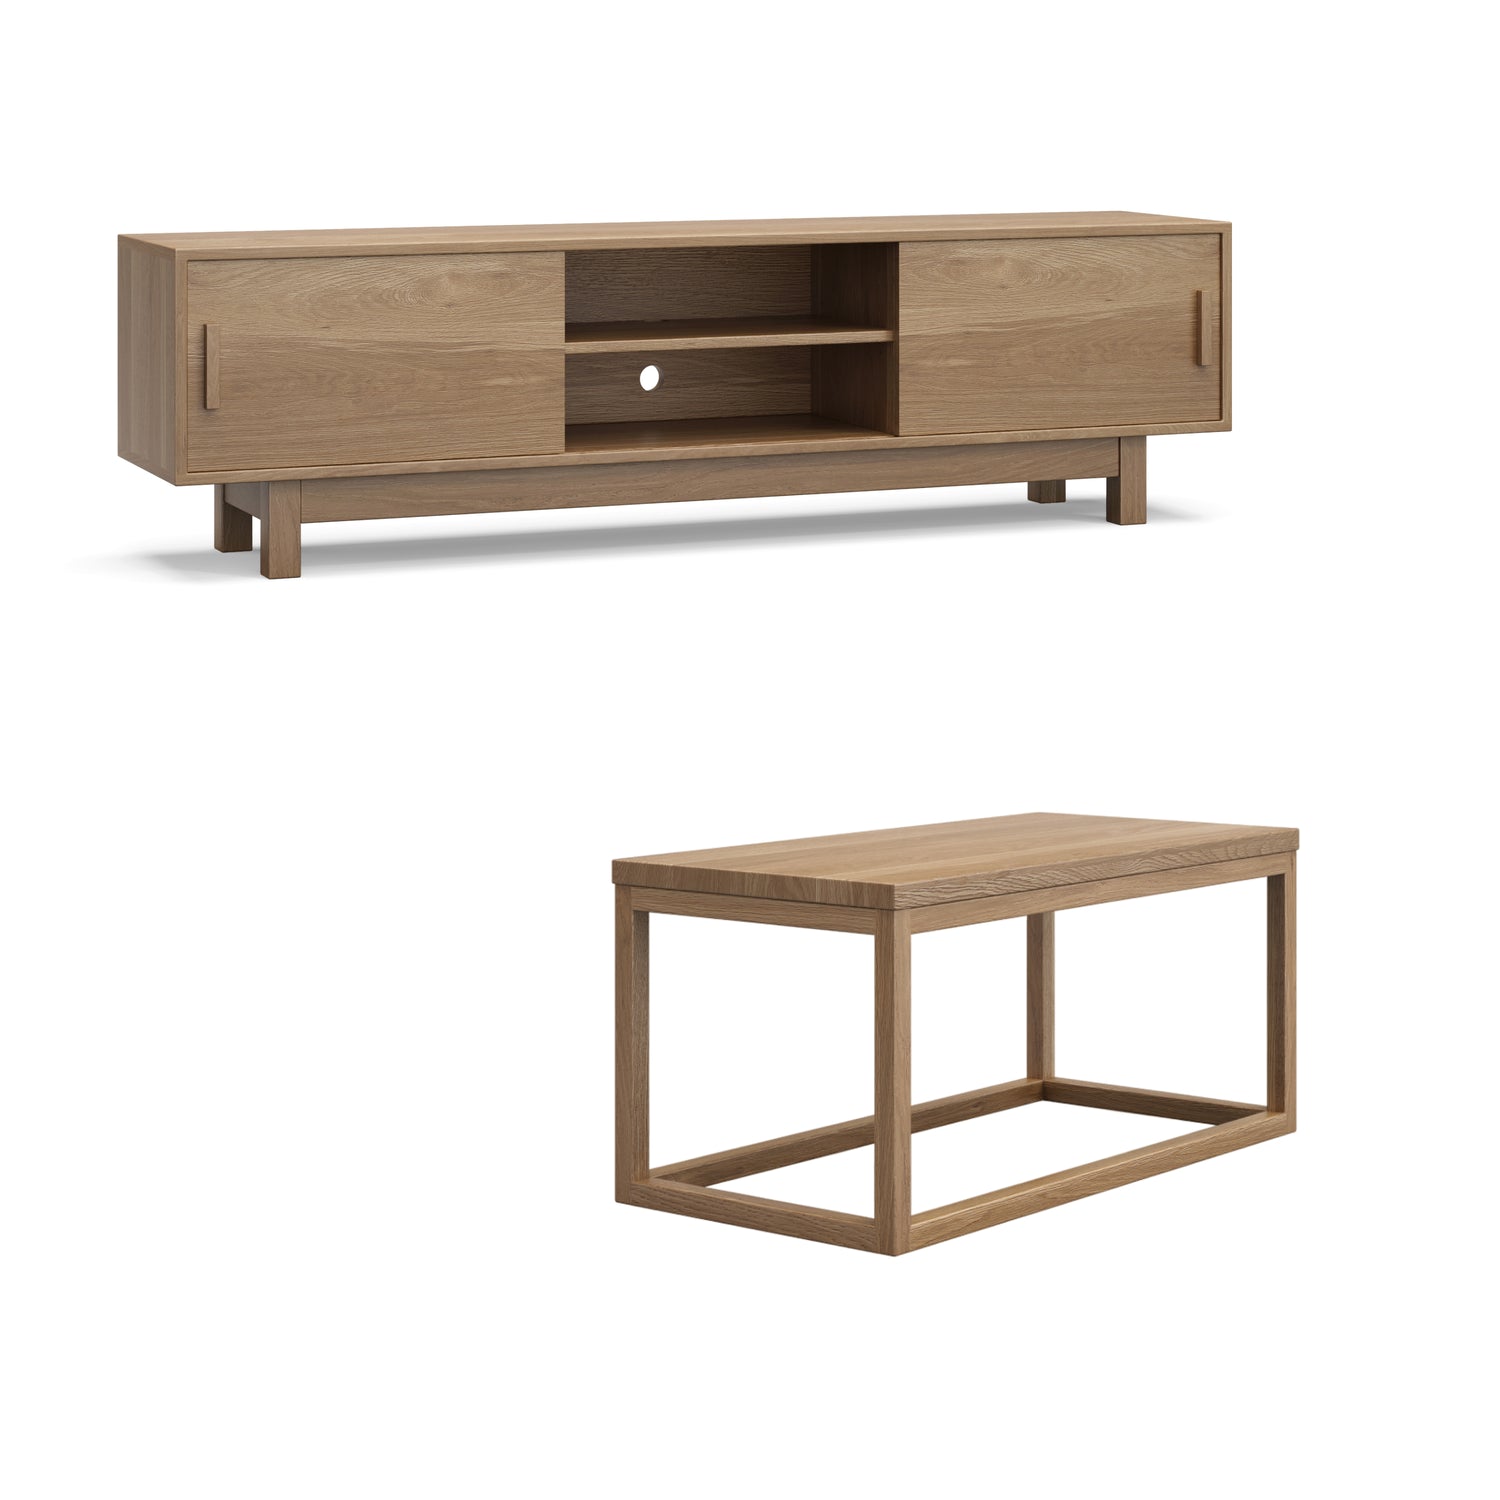 OOM TV unit and Prisme coffee table